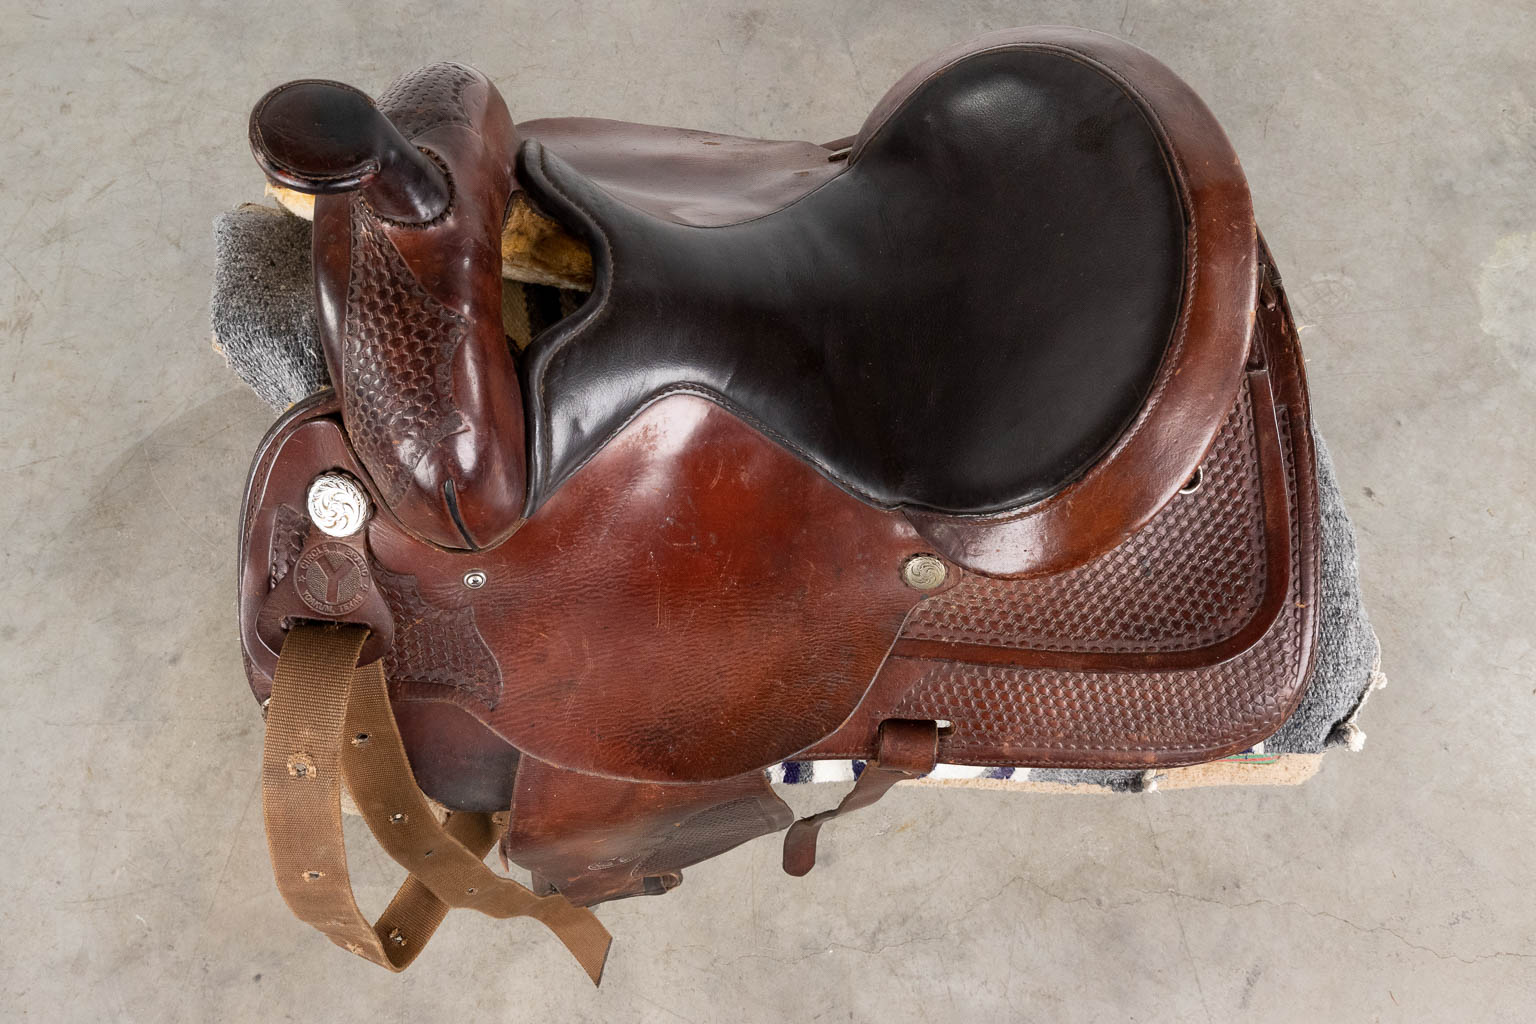 Circle Y Brand Yoakum Texas, a saddle made of leather, leg protectors and a lasso (D:60 x W:70 x H:100 cm)